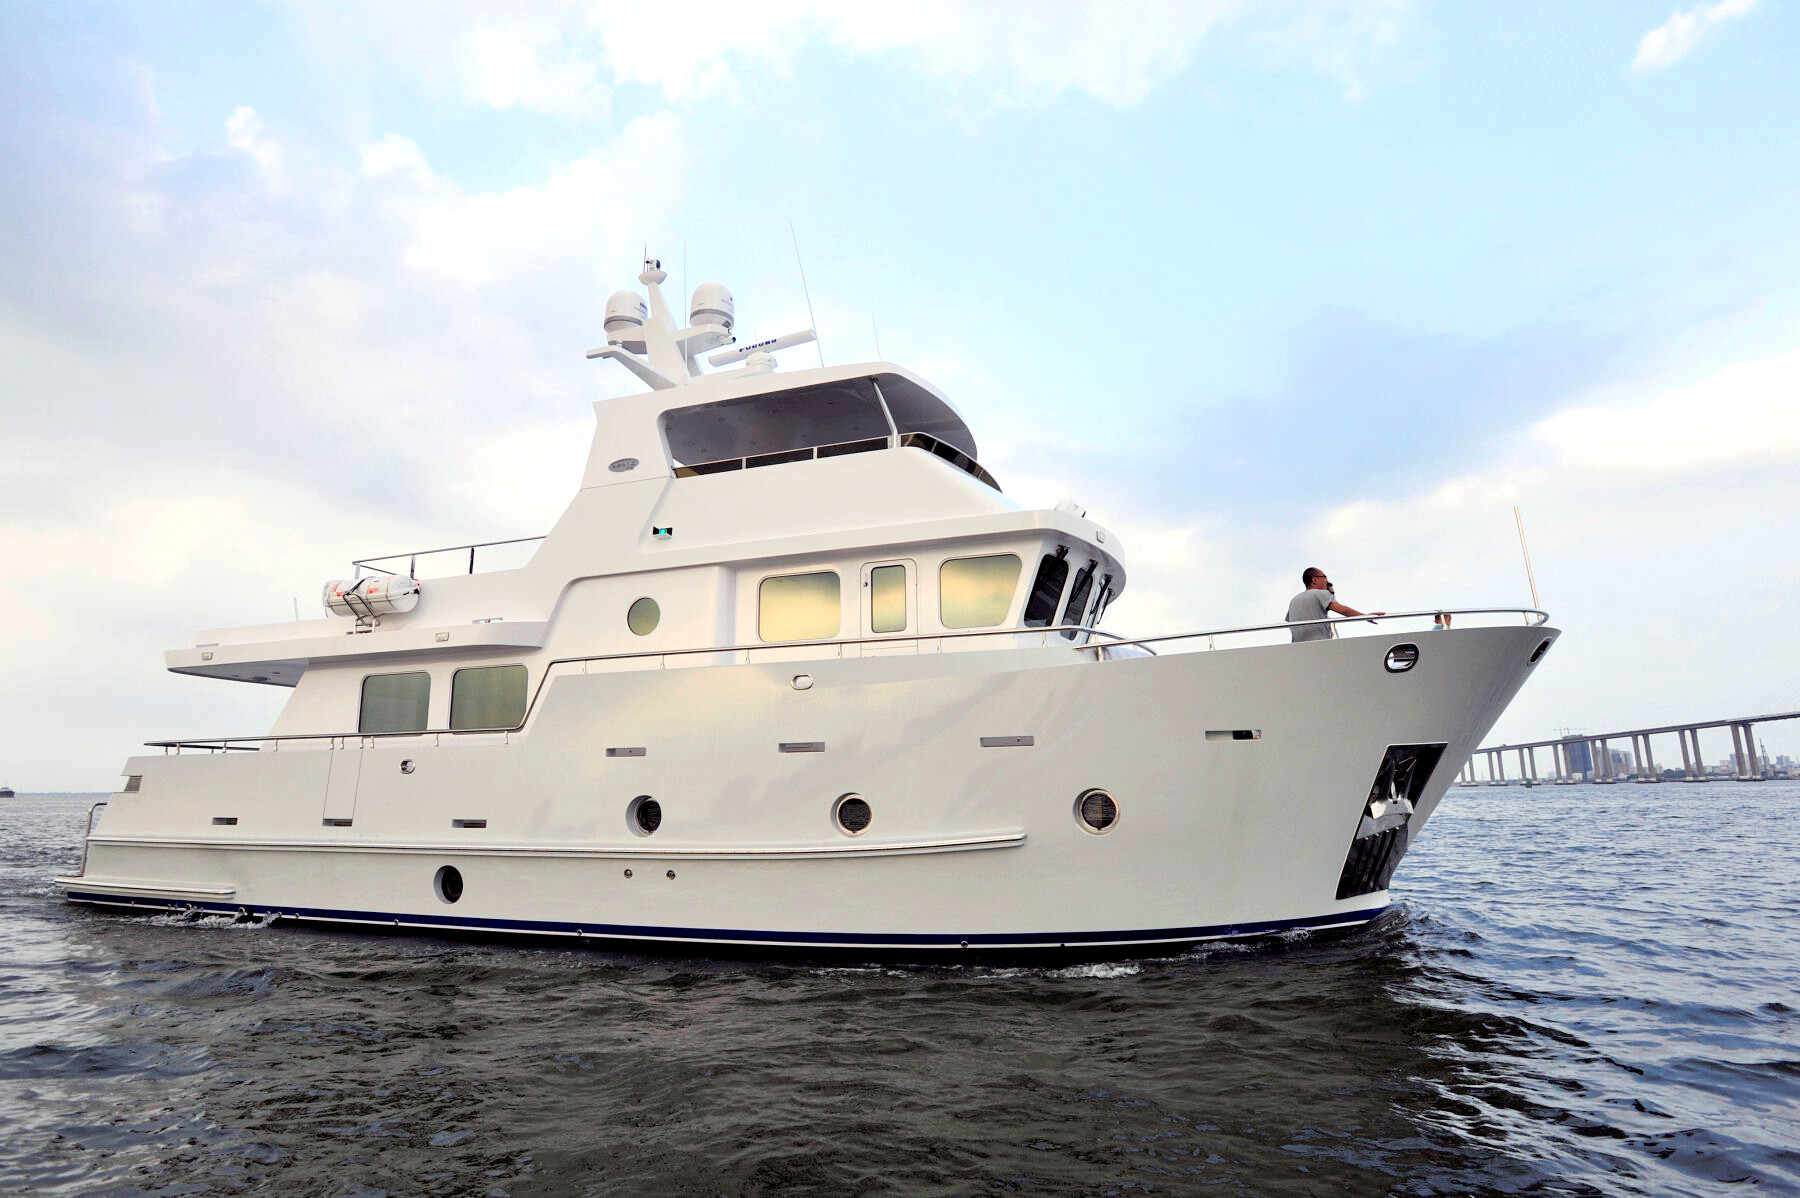 65 foot yacht cost